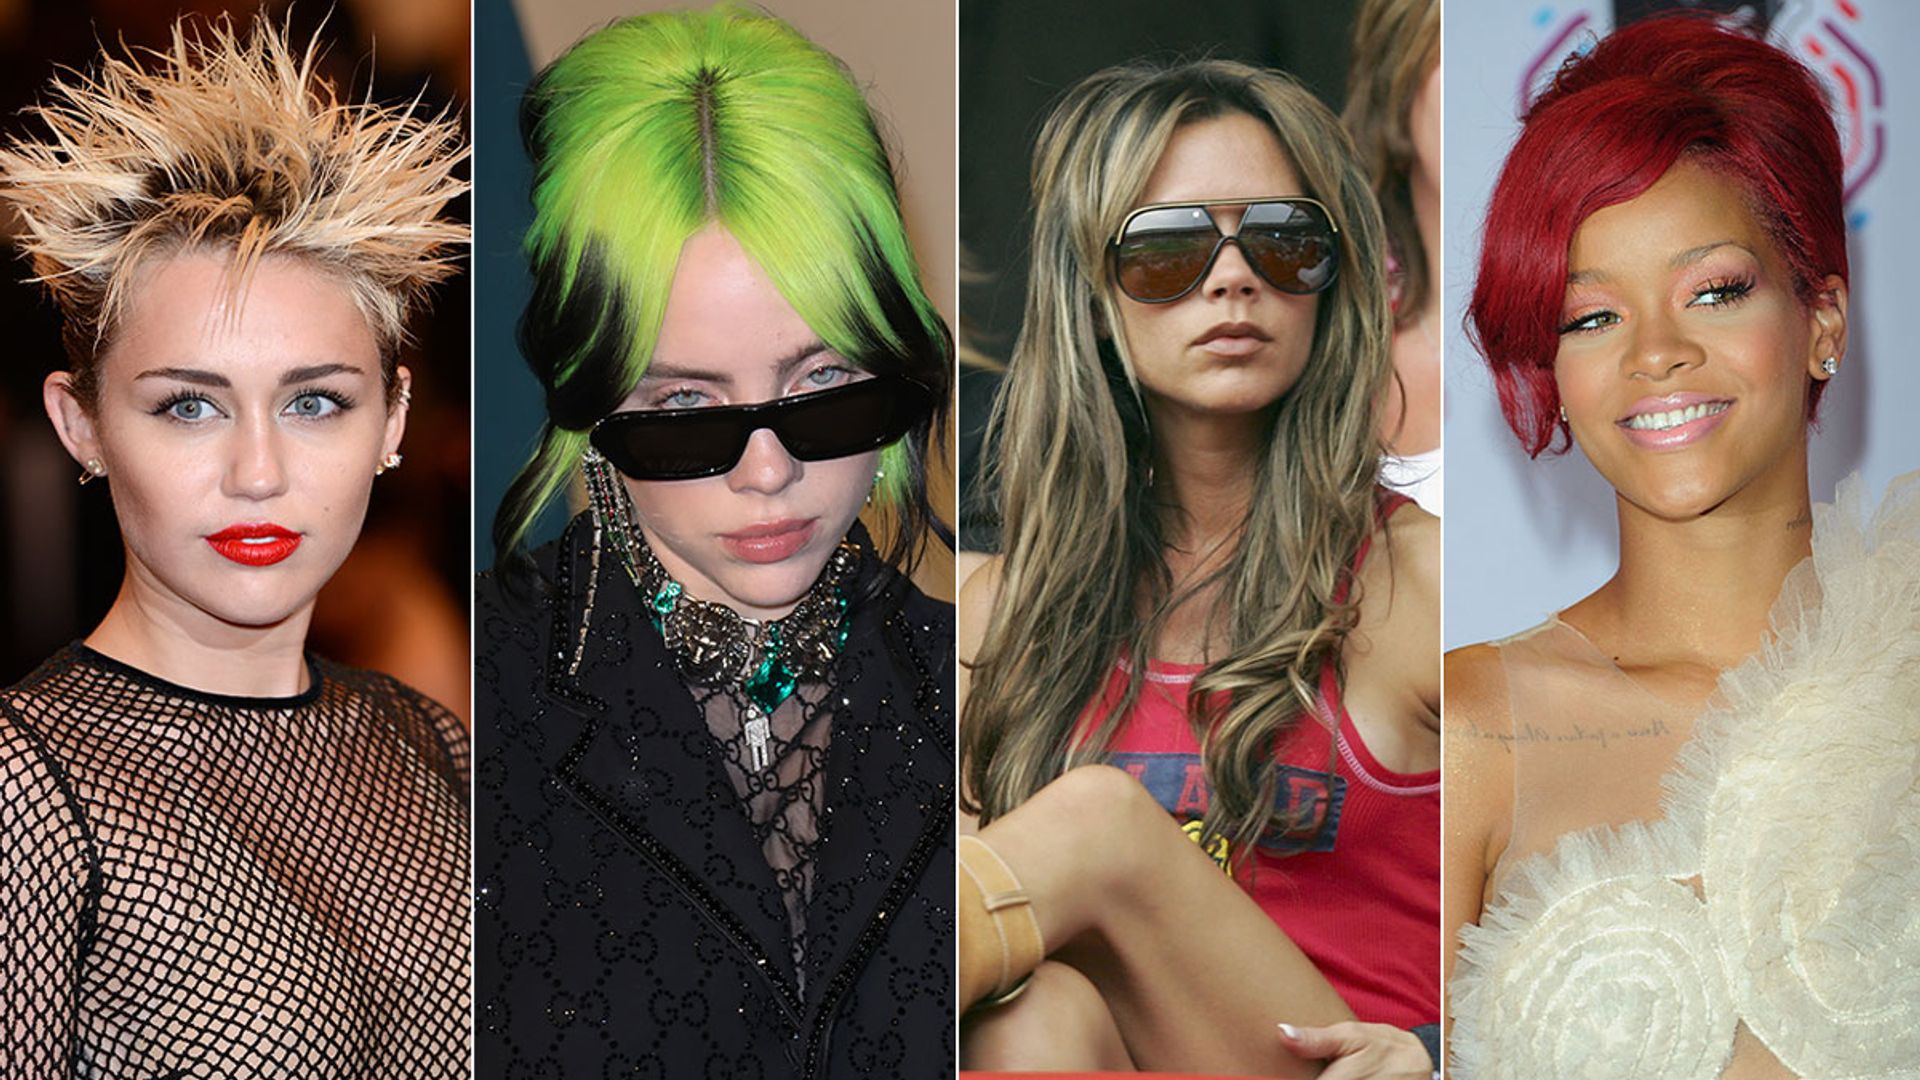 12 top dramatic celebrity hair transformations: Victoria Beckham, Rihanna and more